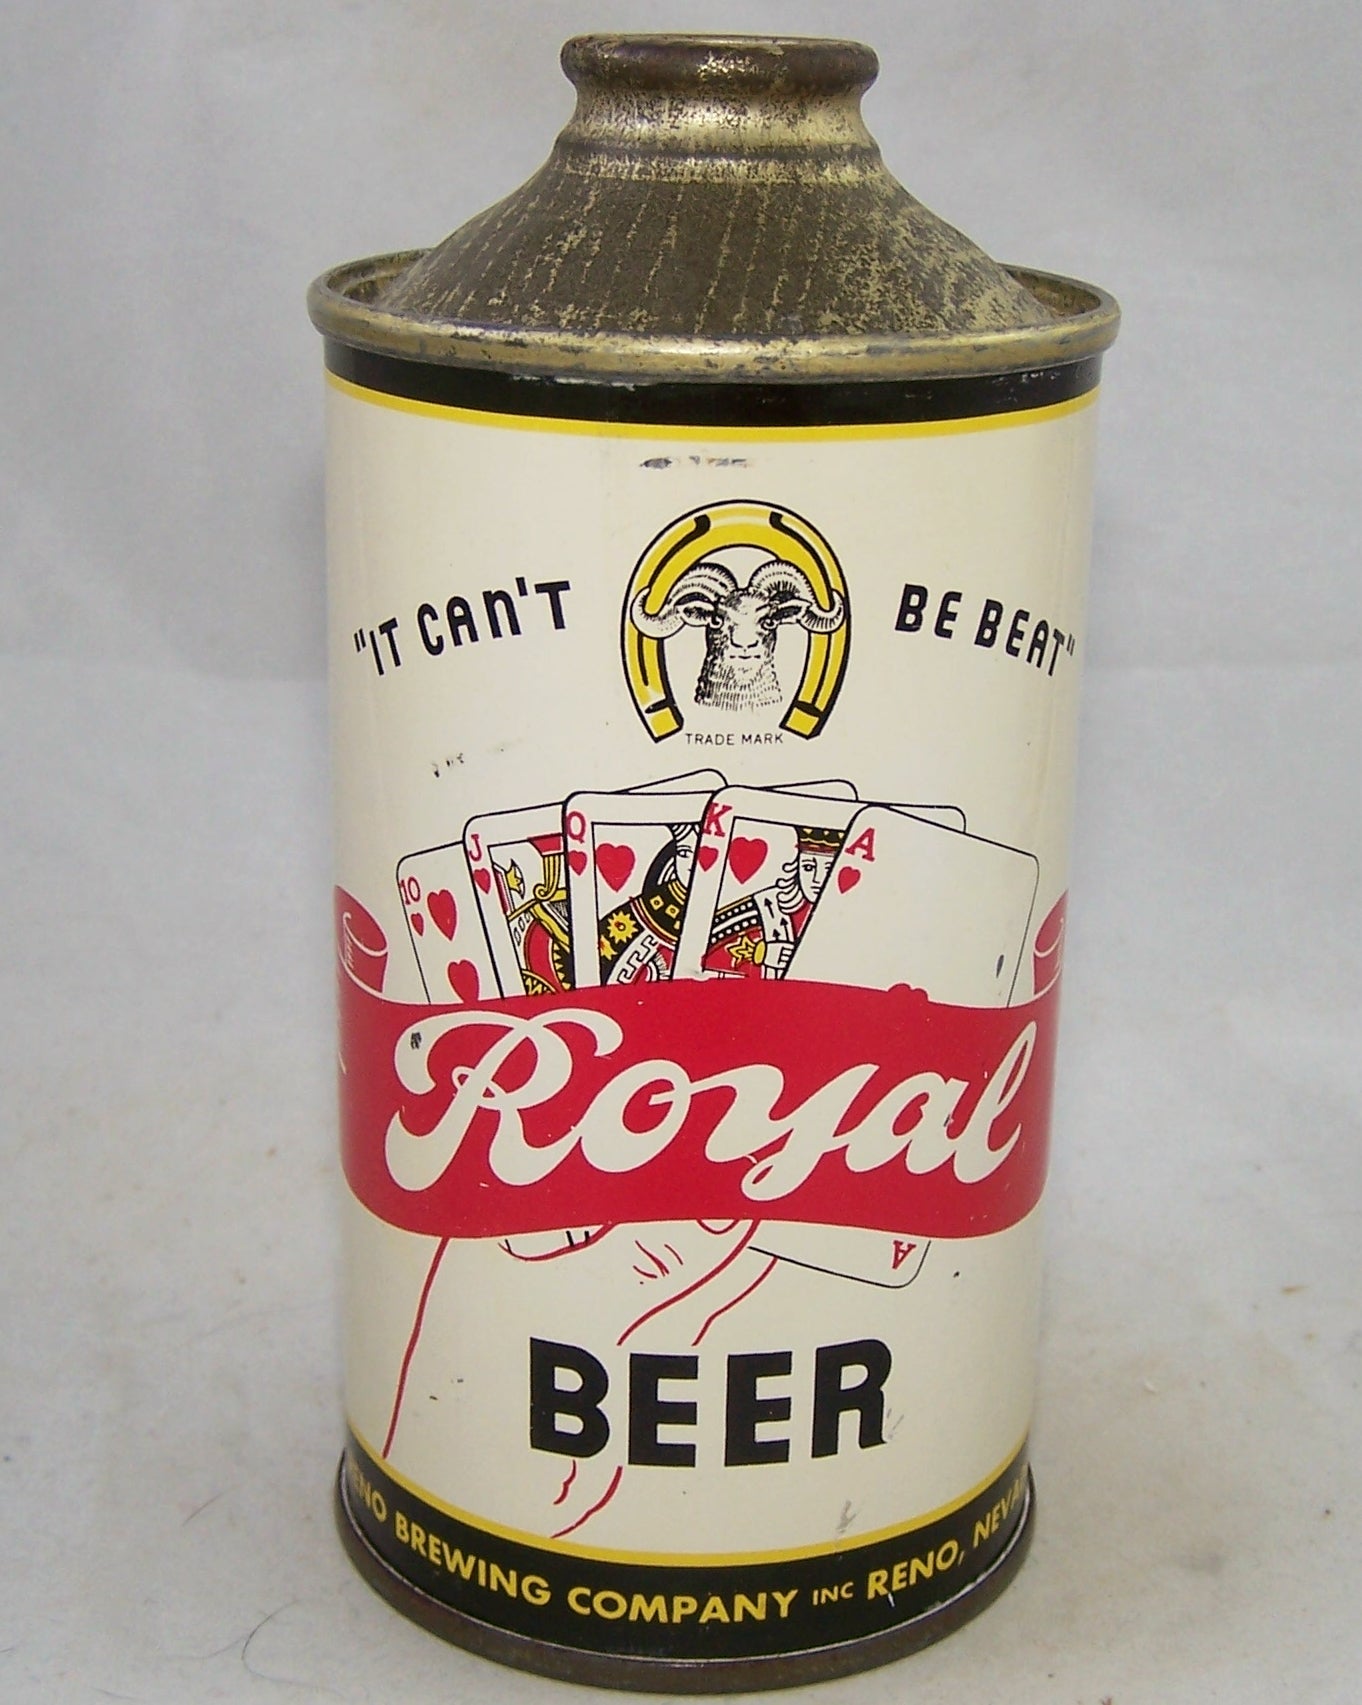 Royal Beer "It Can't Be Beat" USBC 182-12, Grade 1 to 1/1+ Sold on 04/14/18